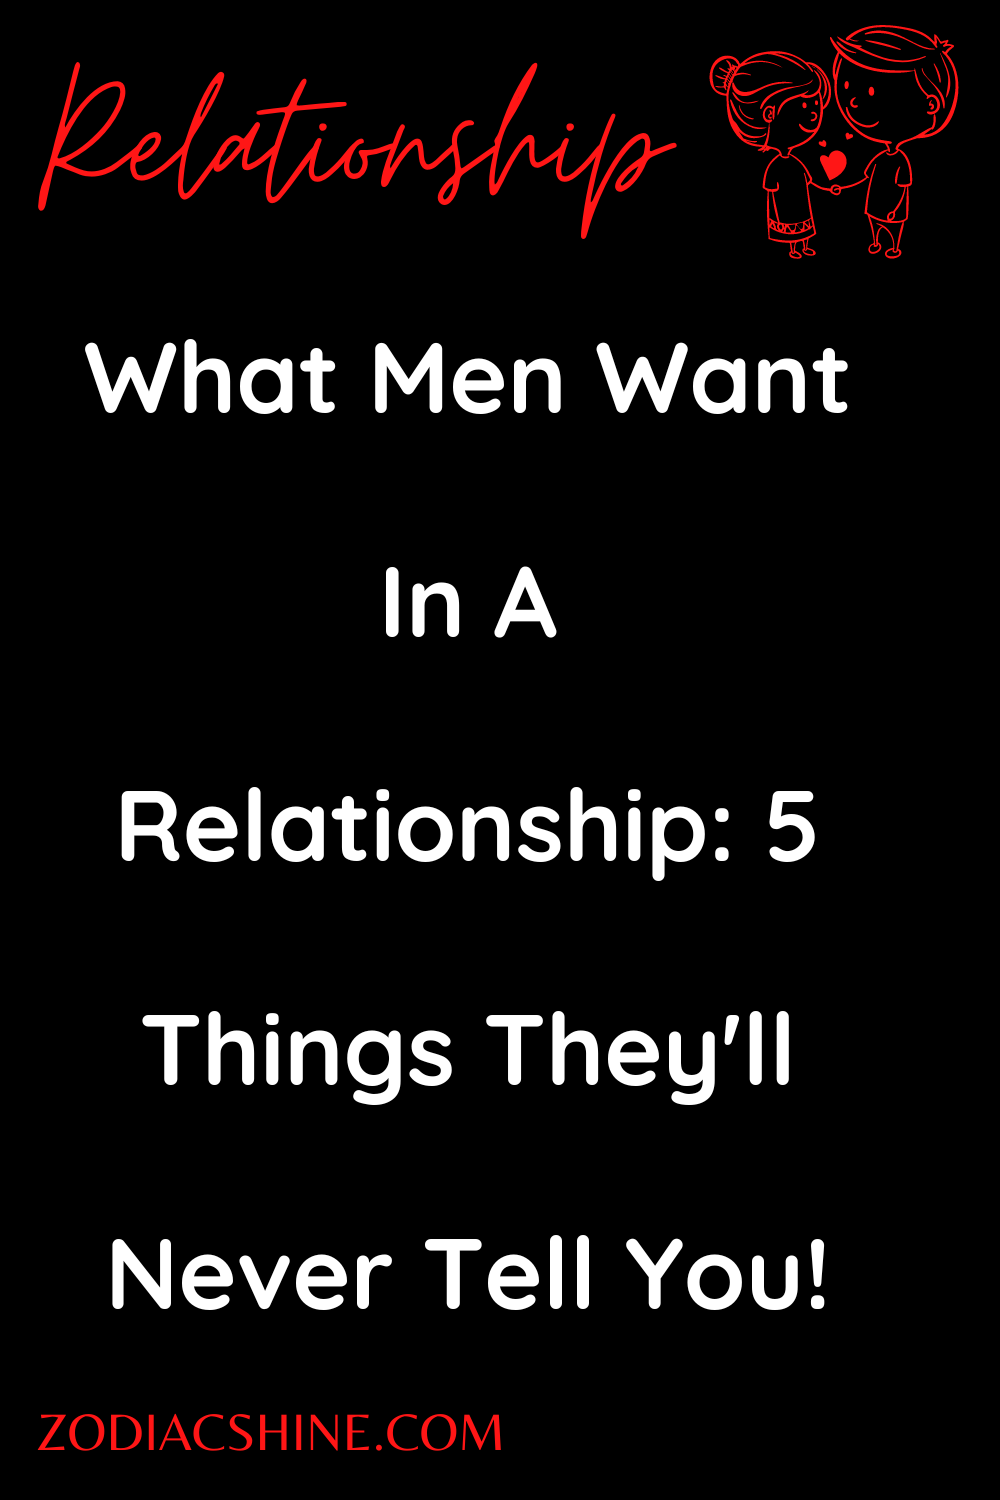 What Men Want In A Relationship: 5 Things They'll Never Tell You!